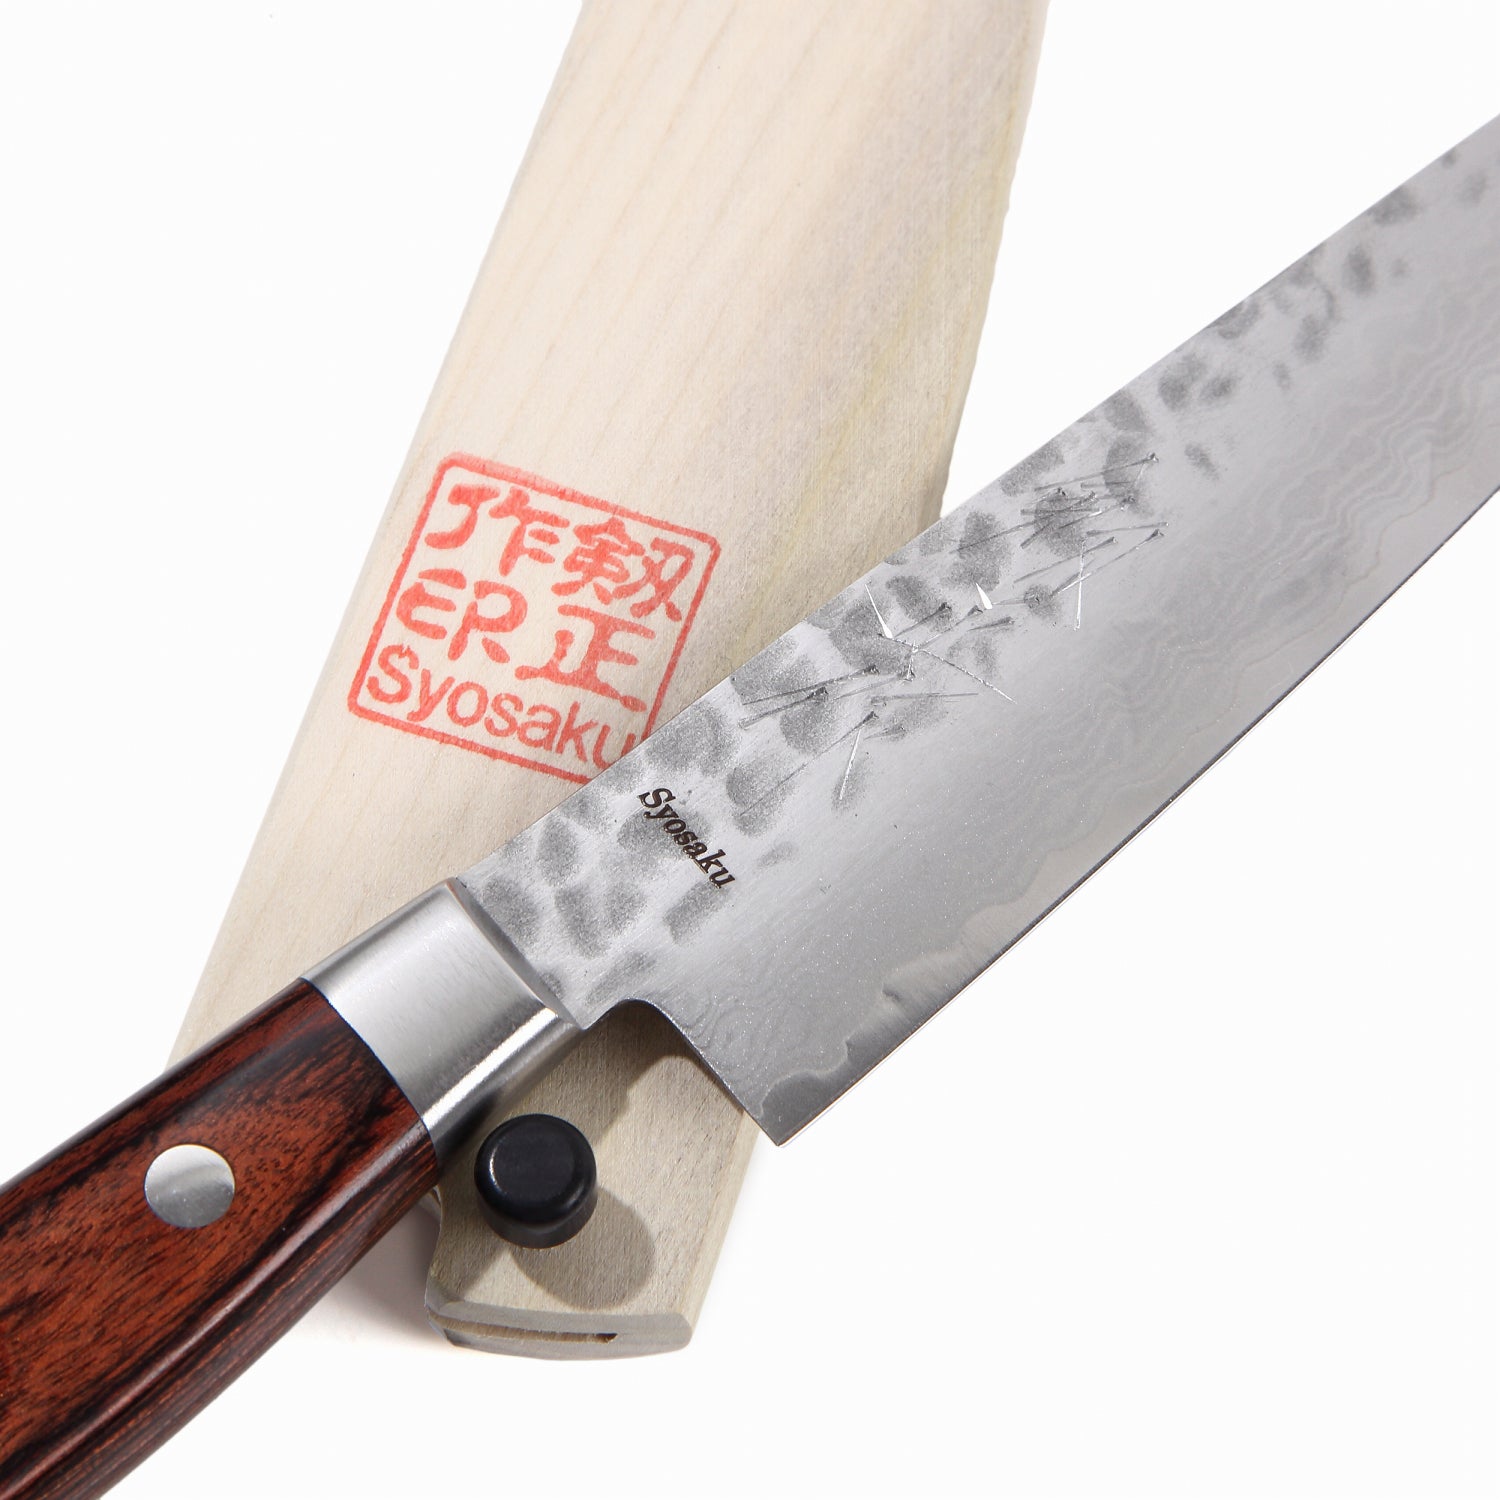 Syosaku Japanese Petty Knife INOX AUS-8A Stainless Steel Integrated Handle, 6-Inch (150mm)